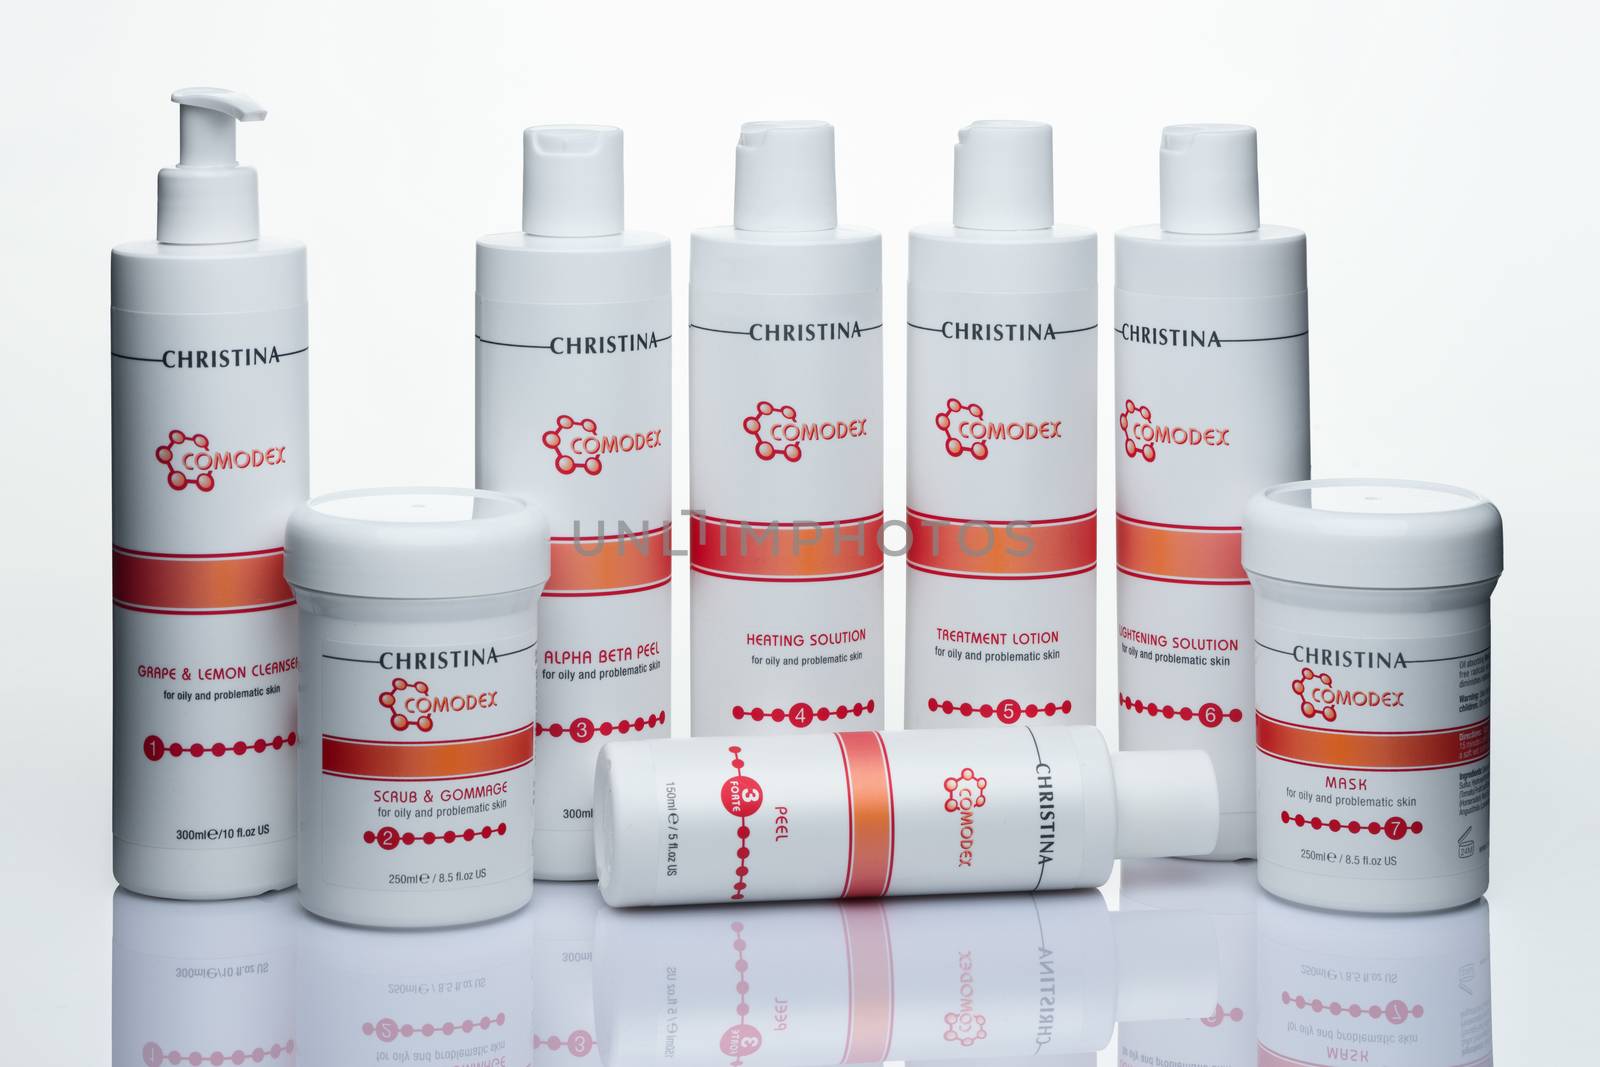 Set of cosmetics for care skin in plastic bottles on a white background, Israel